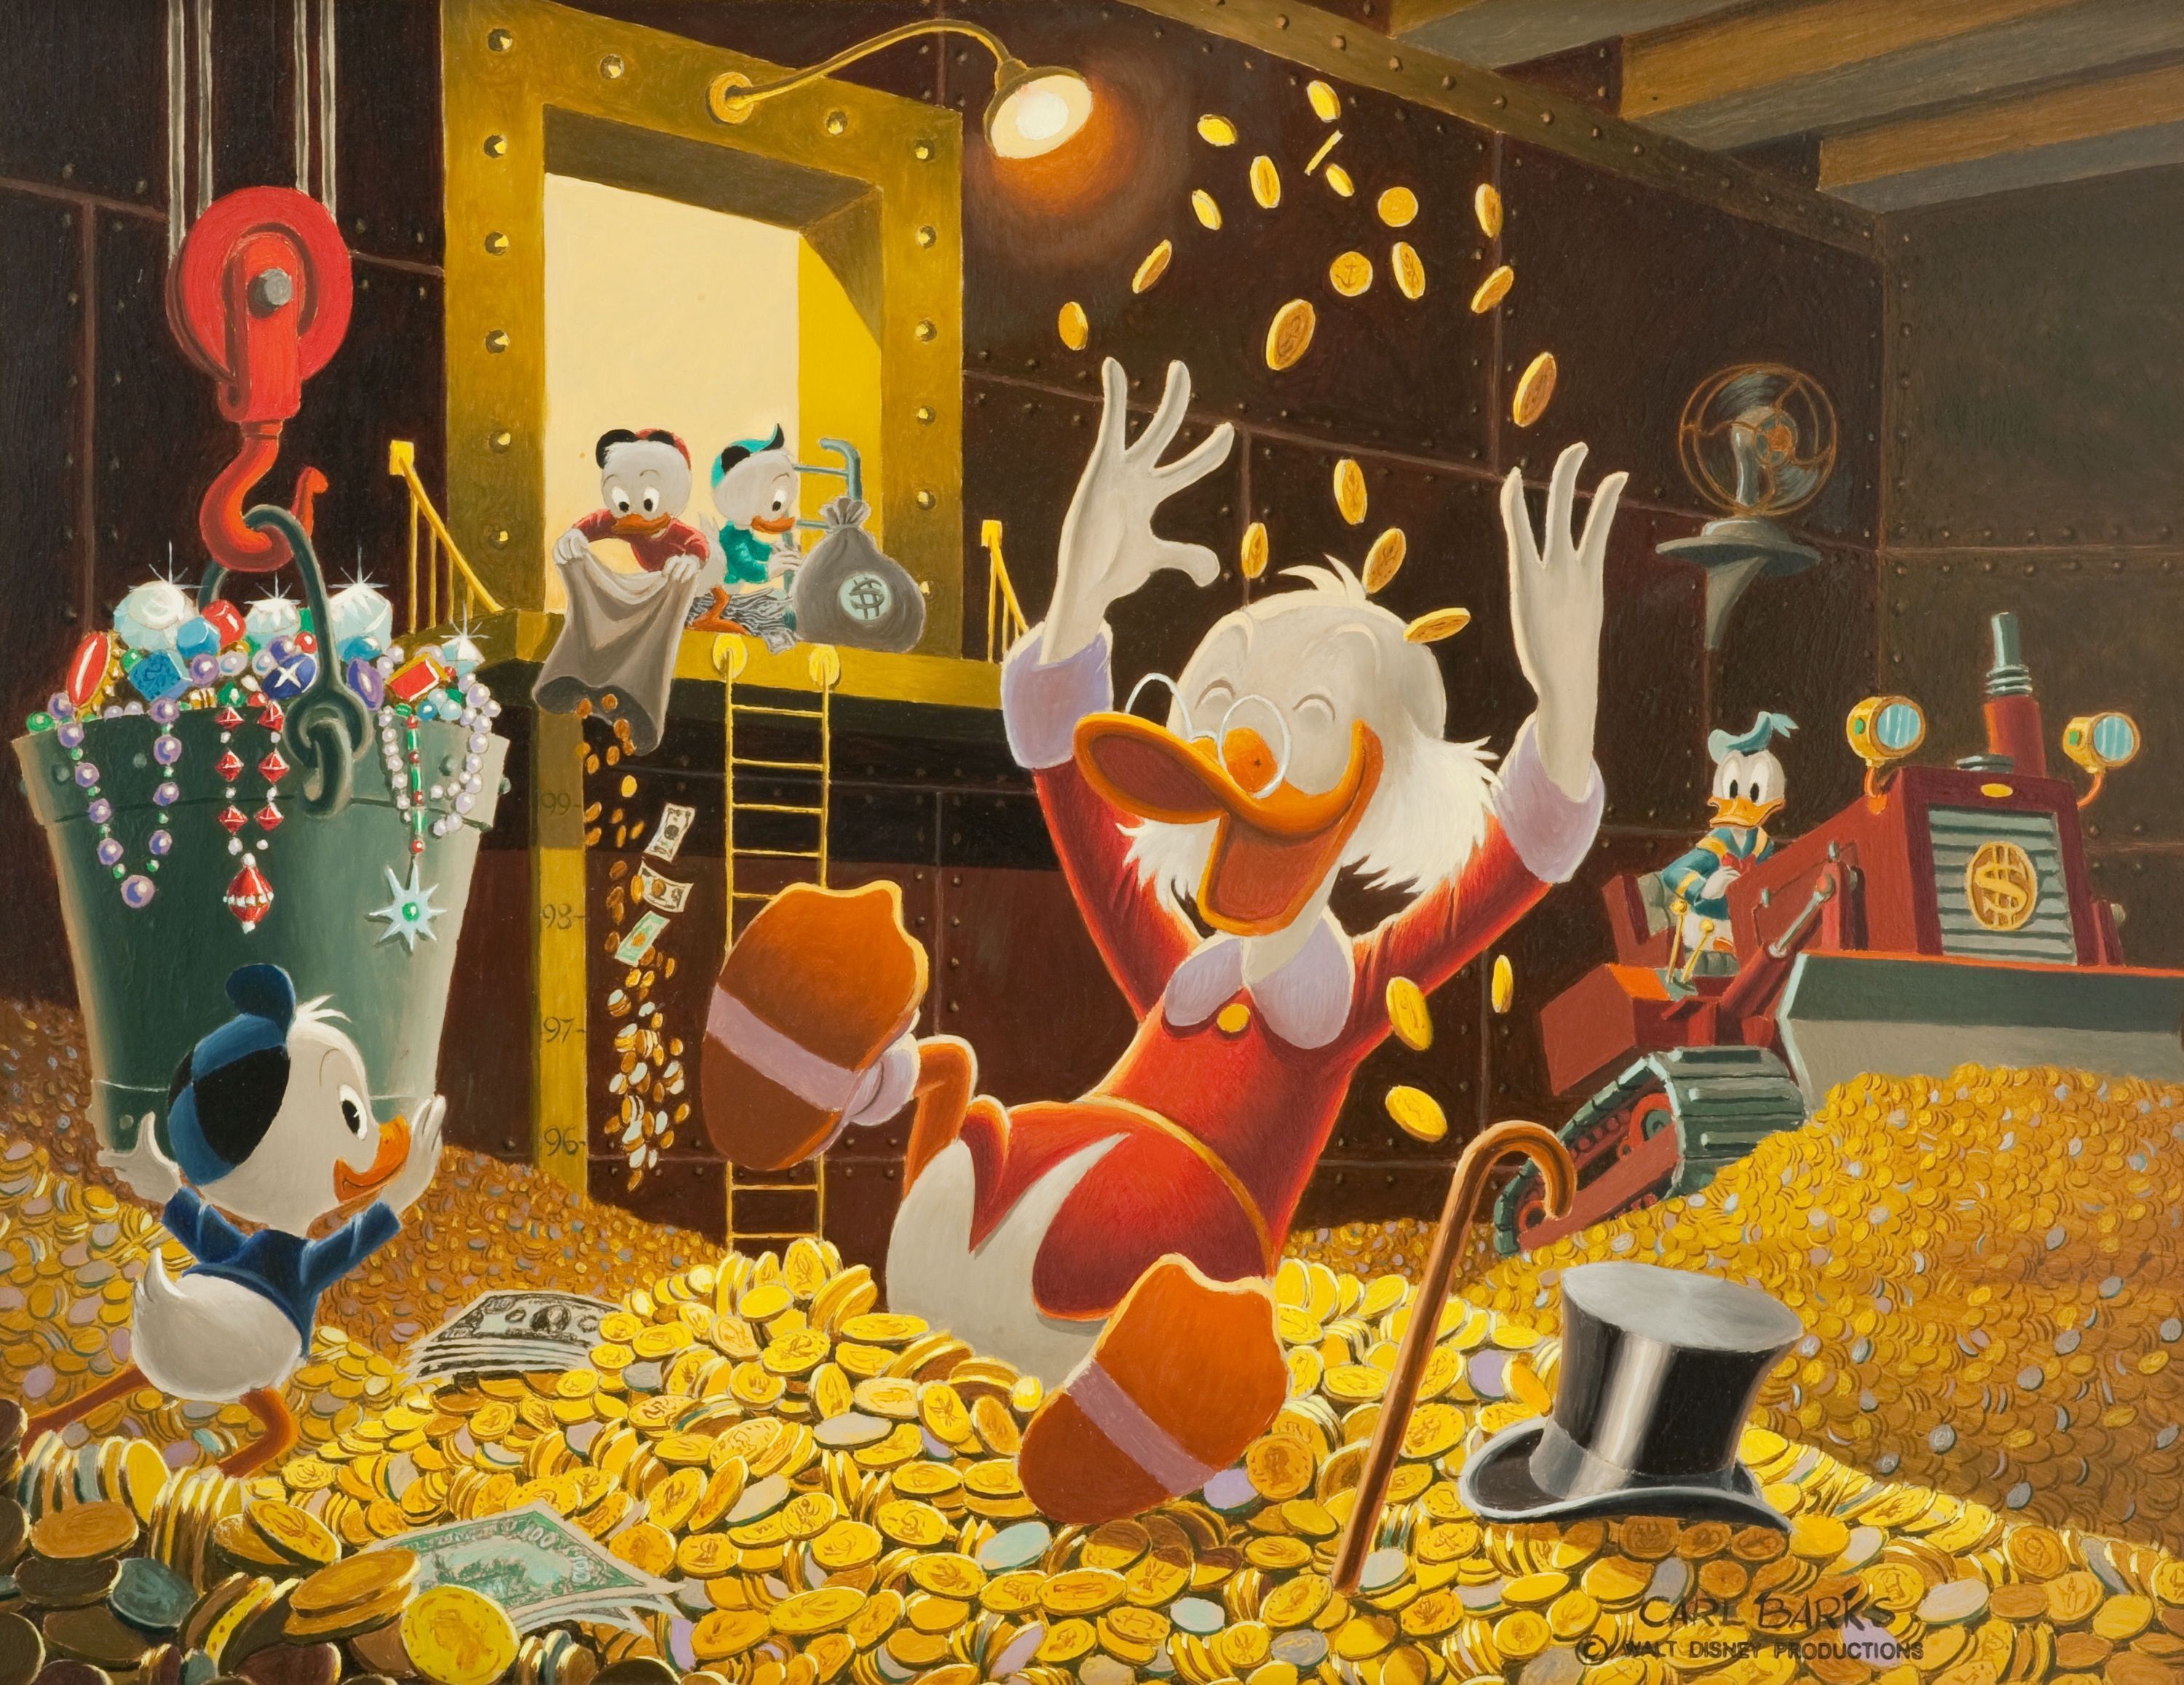 Cartoon drawing of a duck (Scrooge McDuck) joyously playing in giant piles of gold coins. Behind him three other ducks (Donald and his three nephews) help pile the gold in using bulldozers, cranes, and other tools.